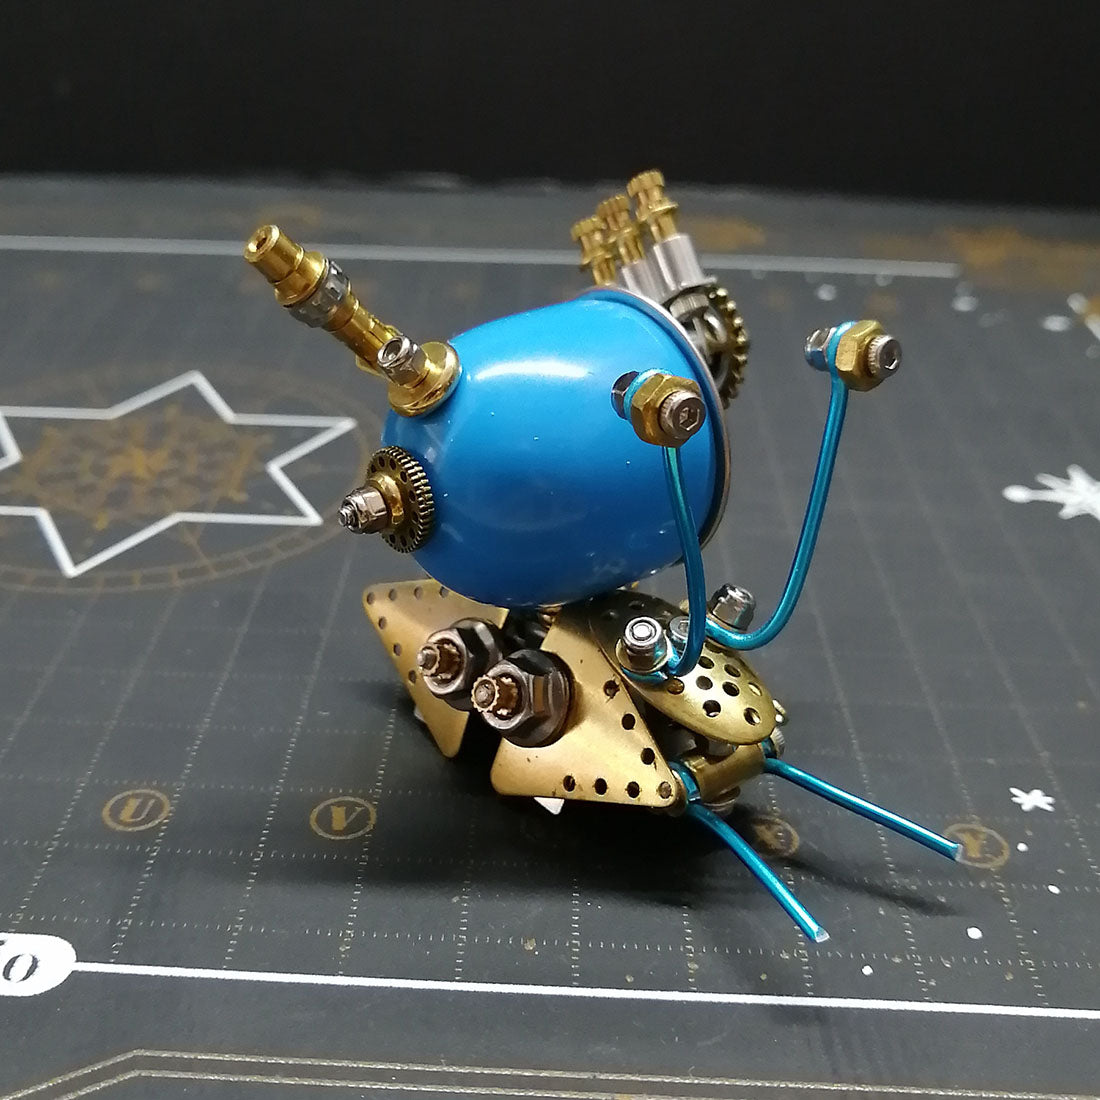 Colorful Steampunk Snail 3D DIY Metal Insect Kits